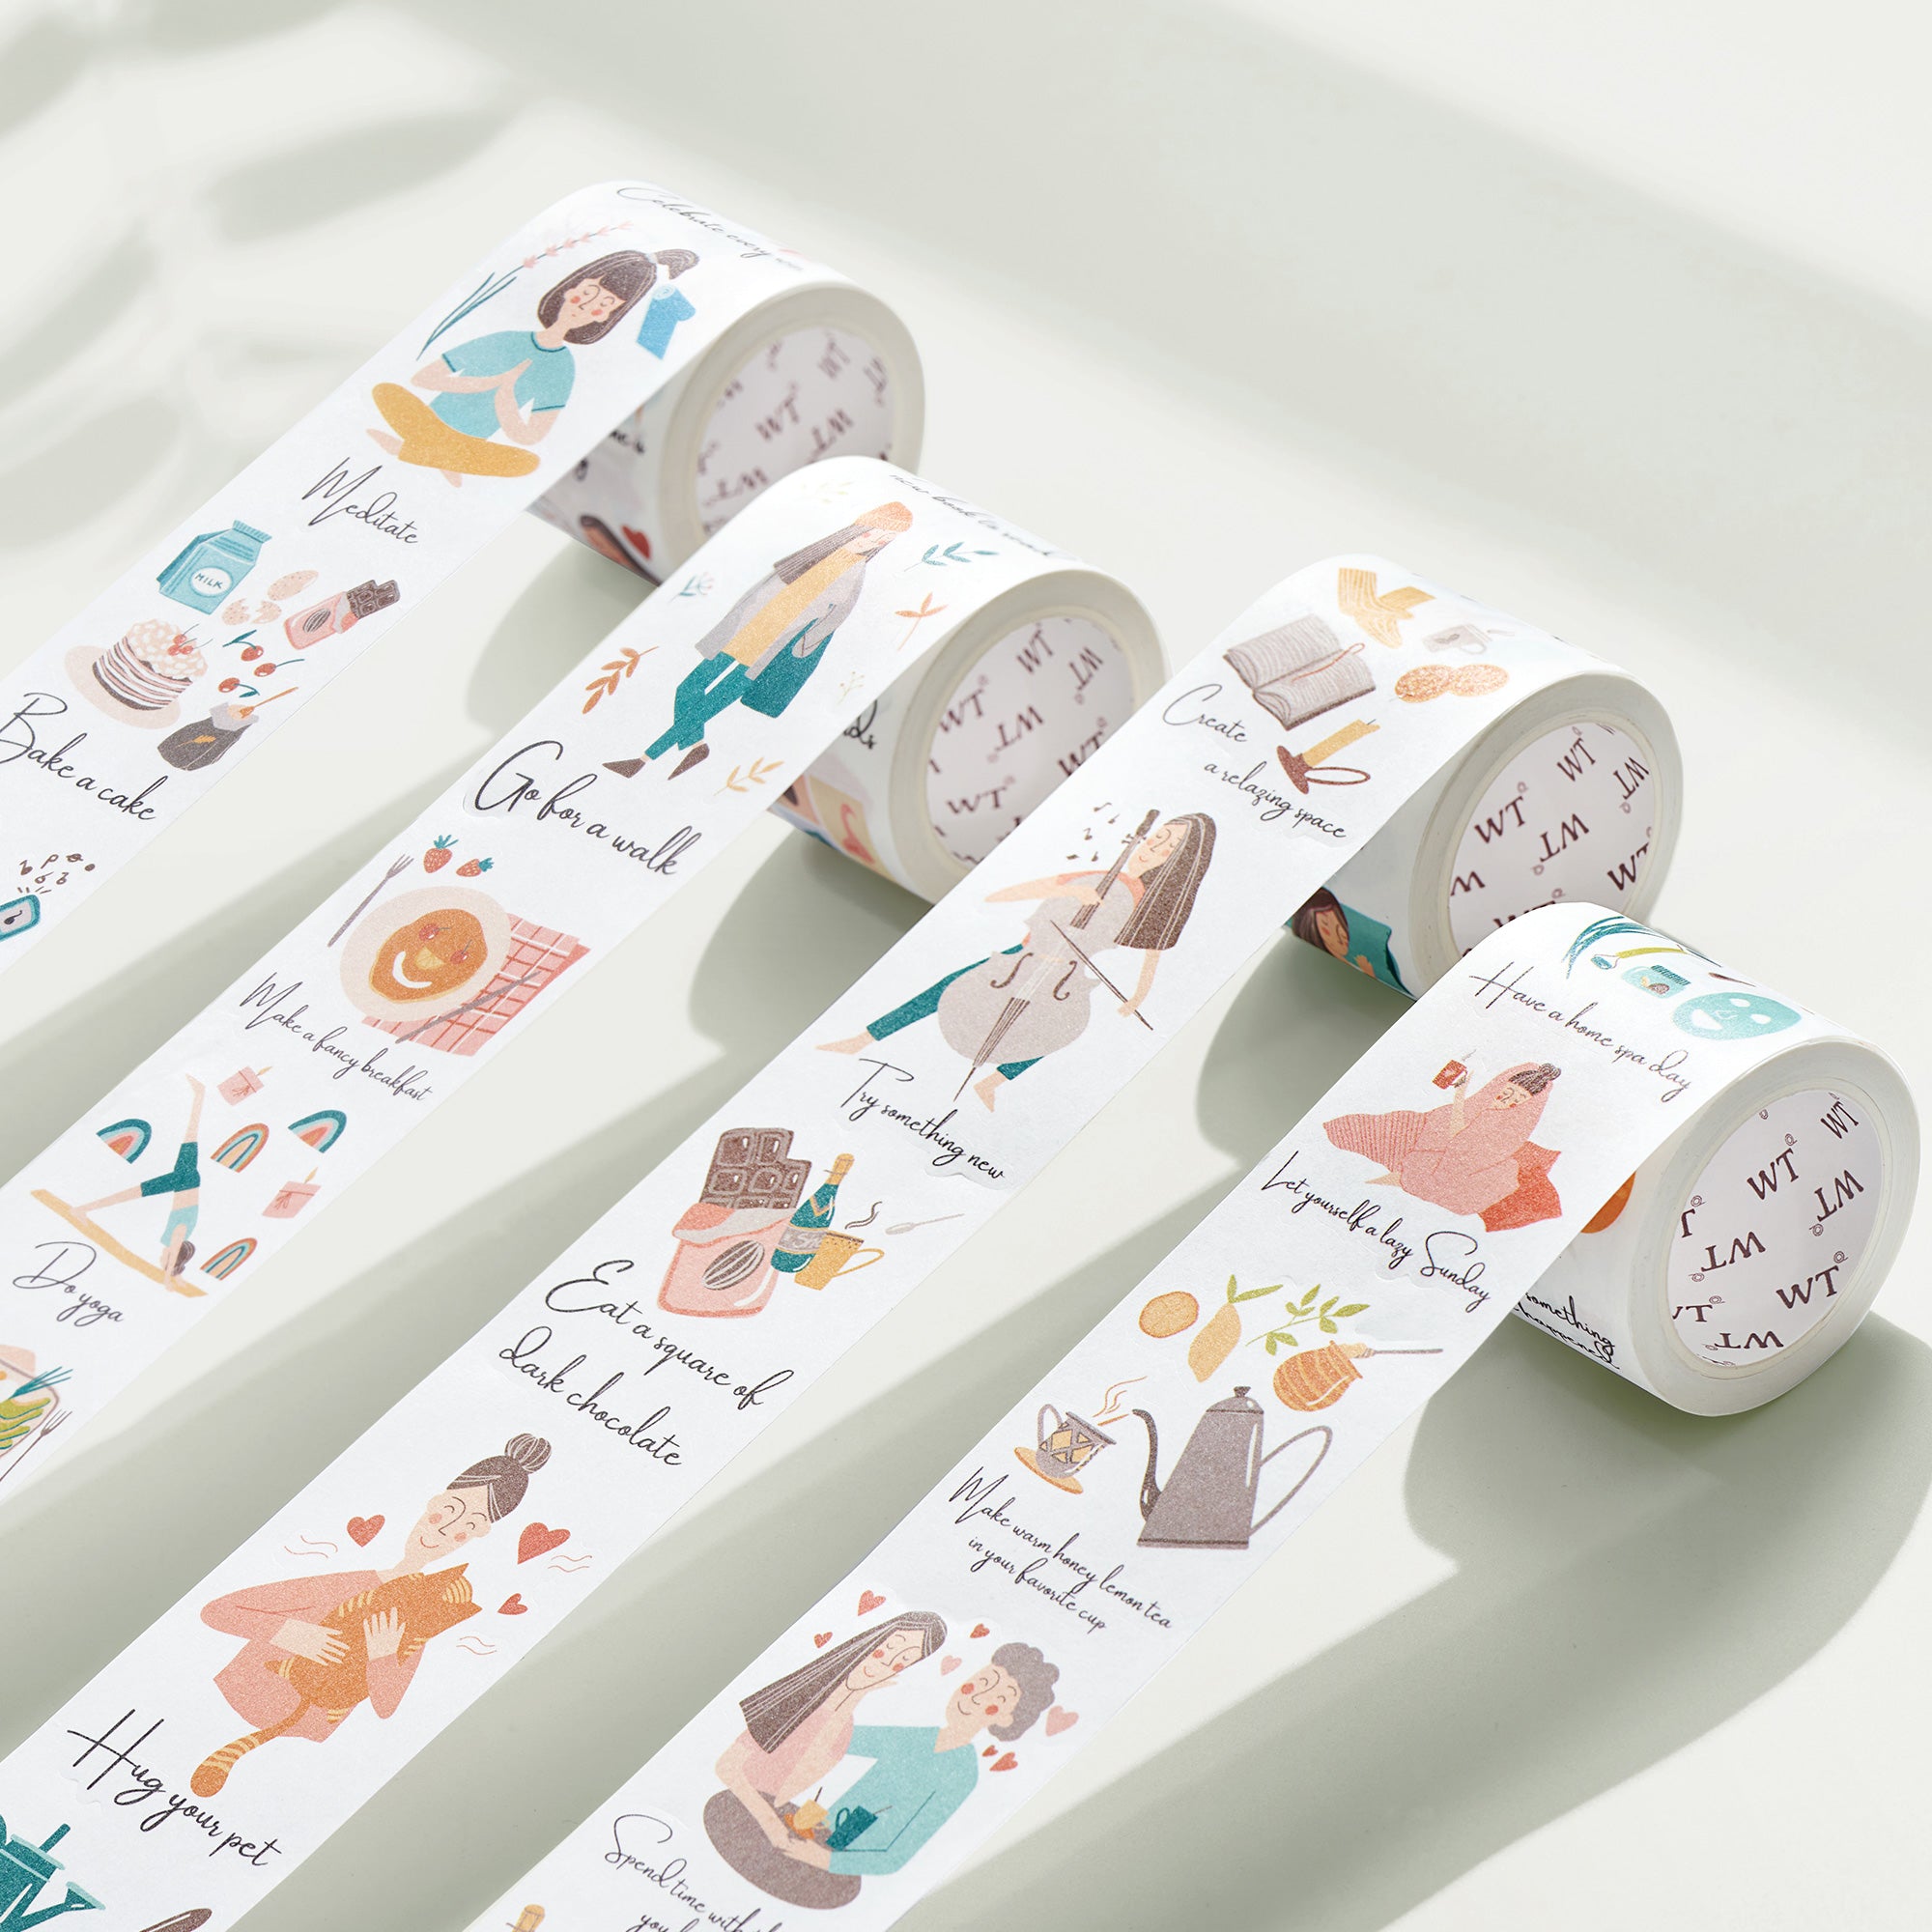 Life's Essense Washi Tape Sticker Set | The Washi Tape Shop. Beautiful Washi and Decorative Tape For Bullet Journals, Gift Wrapping, Planner Decoration and DIY Projects